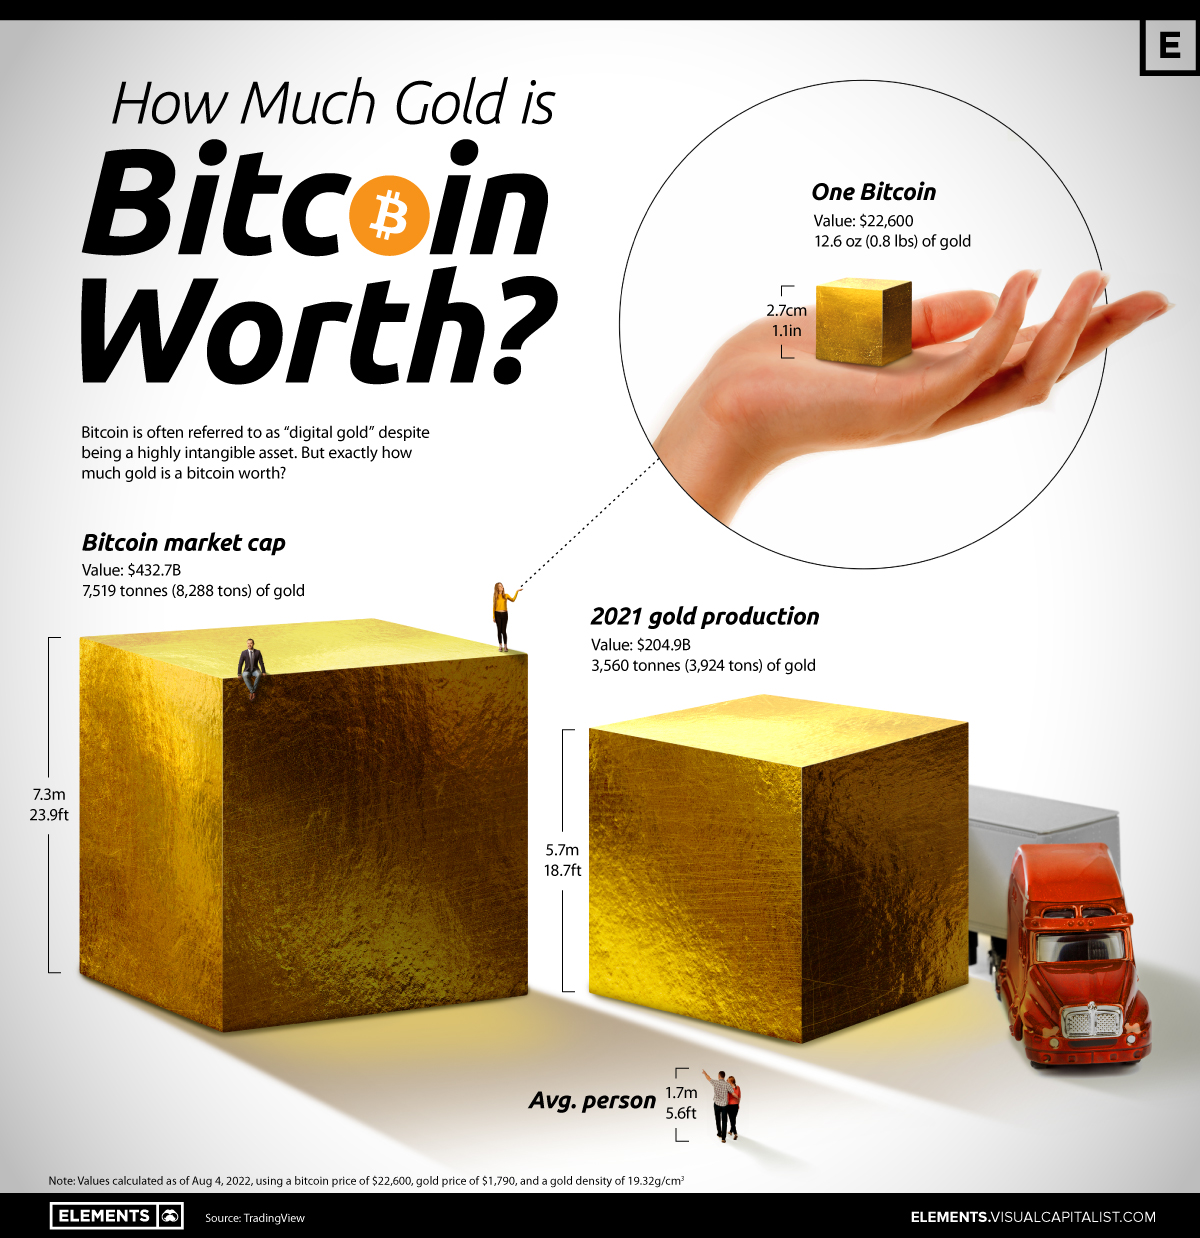 how much was a bitcoin worth in 2019